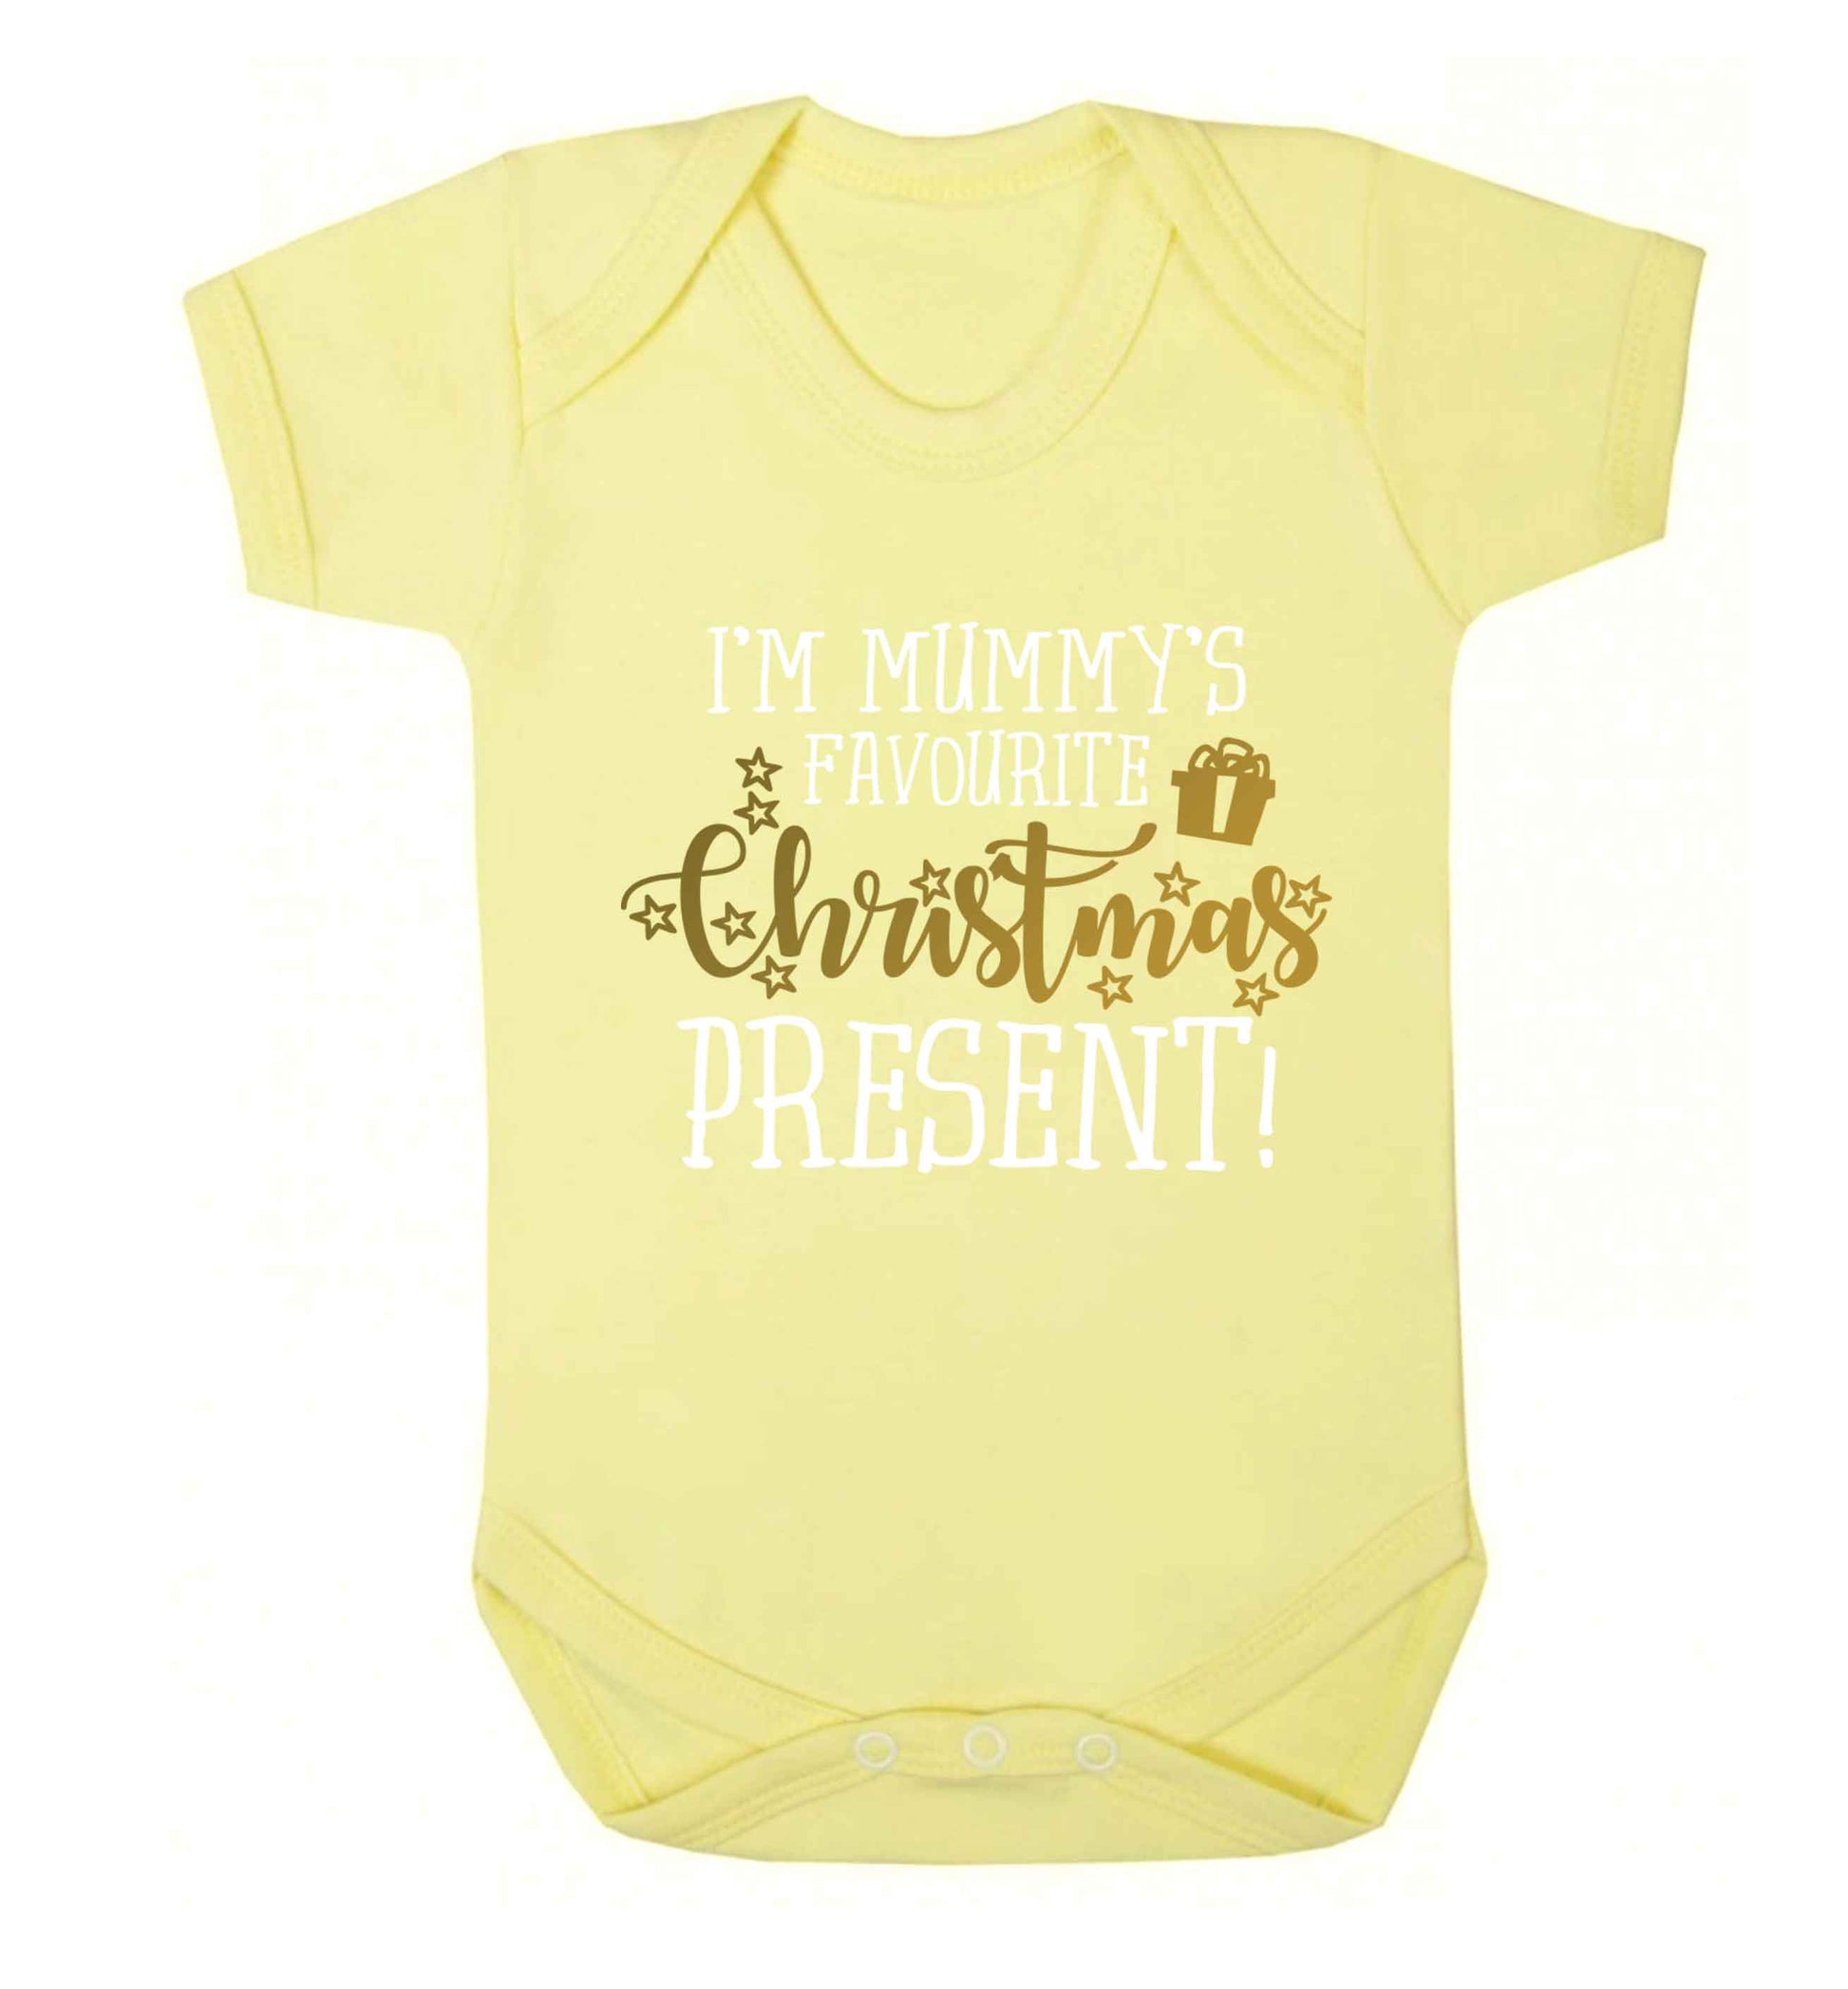 I'm Mummy's favourite Christmas present Baby Vest pale yellow 18-24 months